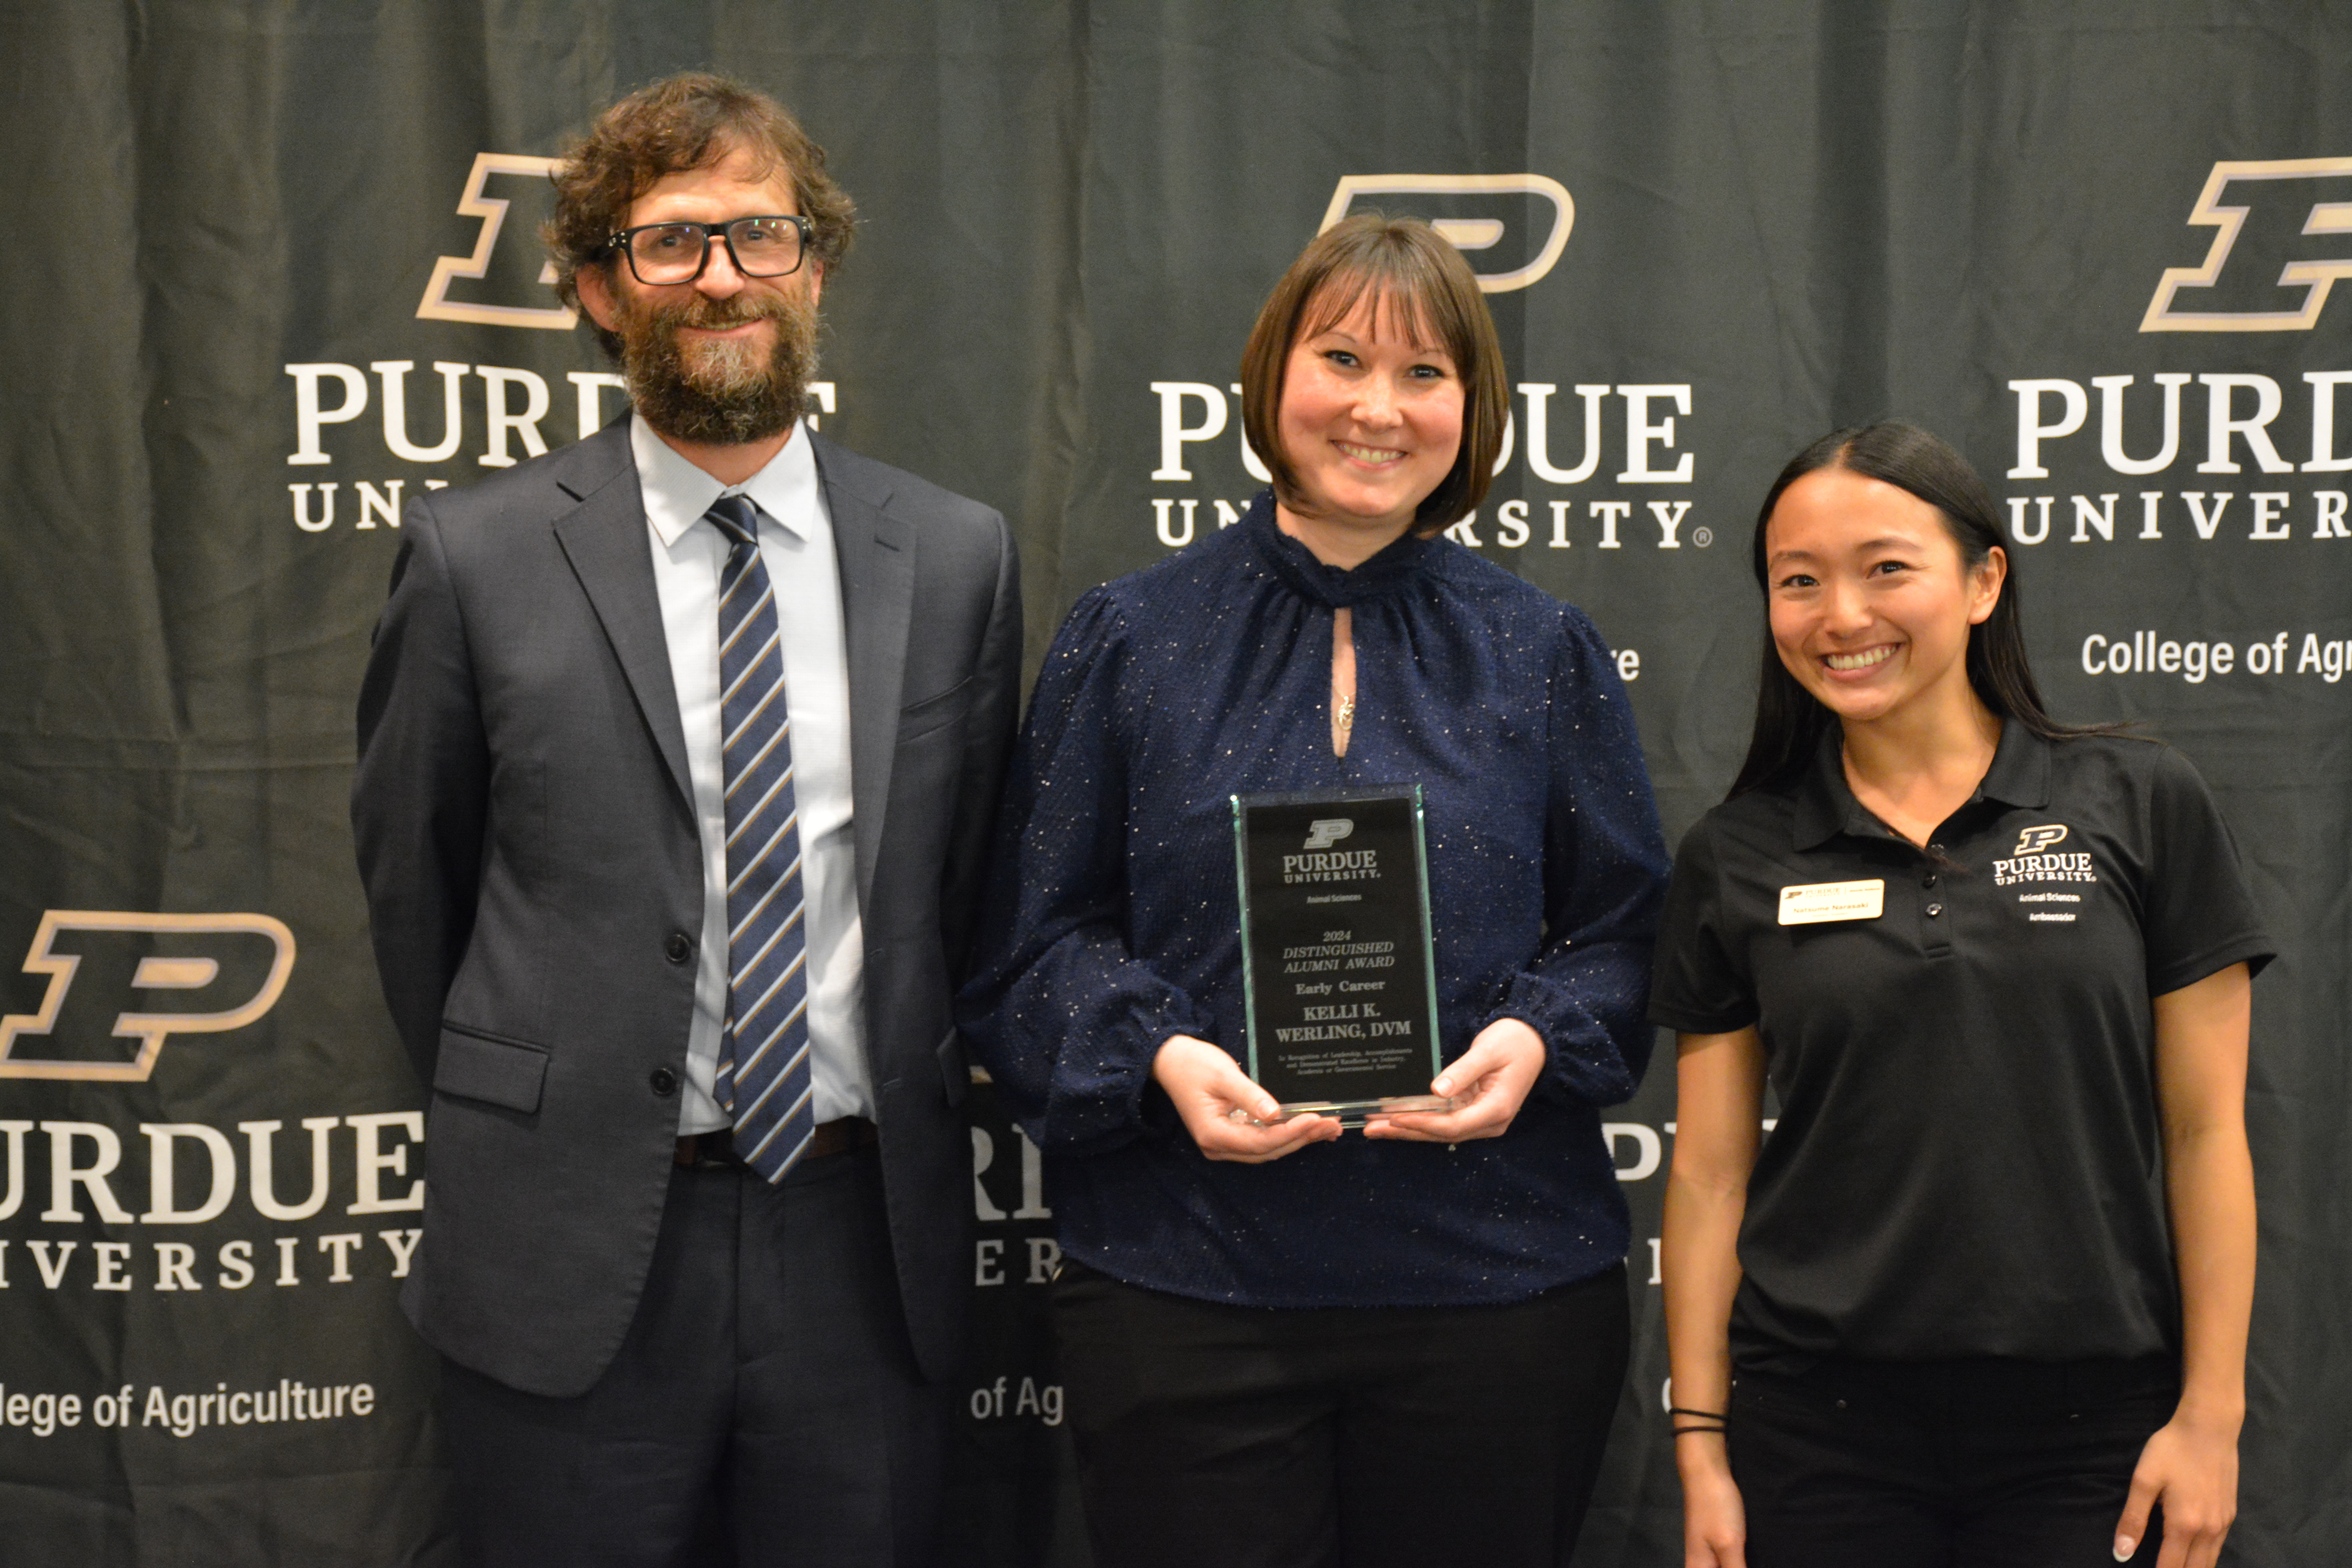 Dr. Kelli Werling accepting her award. Dr. Paul Ebner and Natsume Narasaki stand next to her.